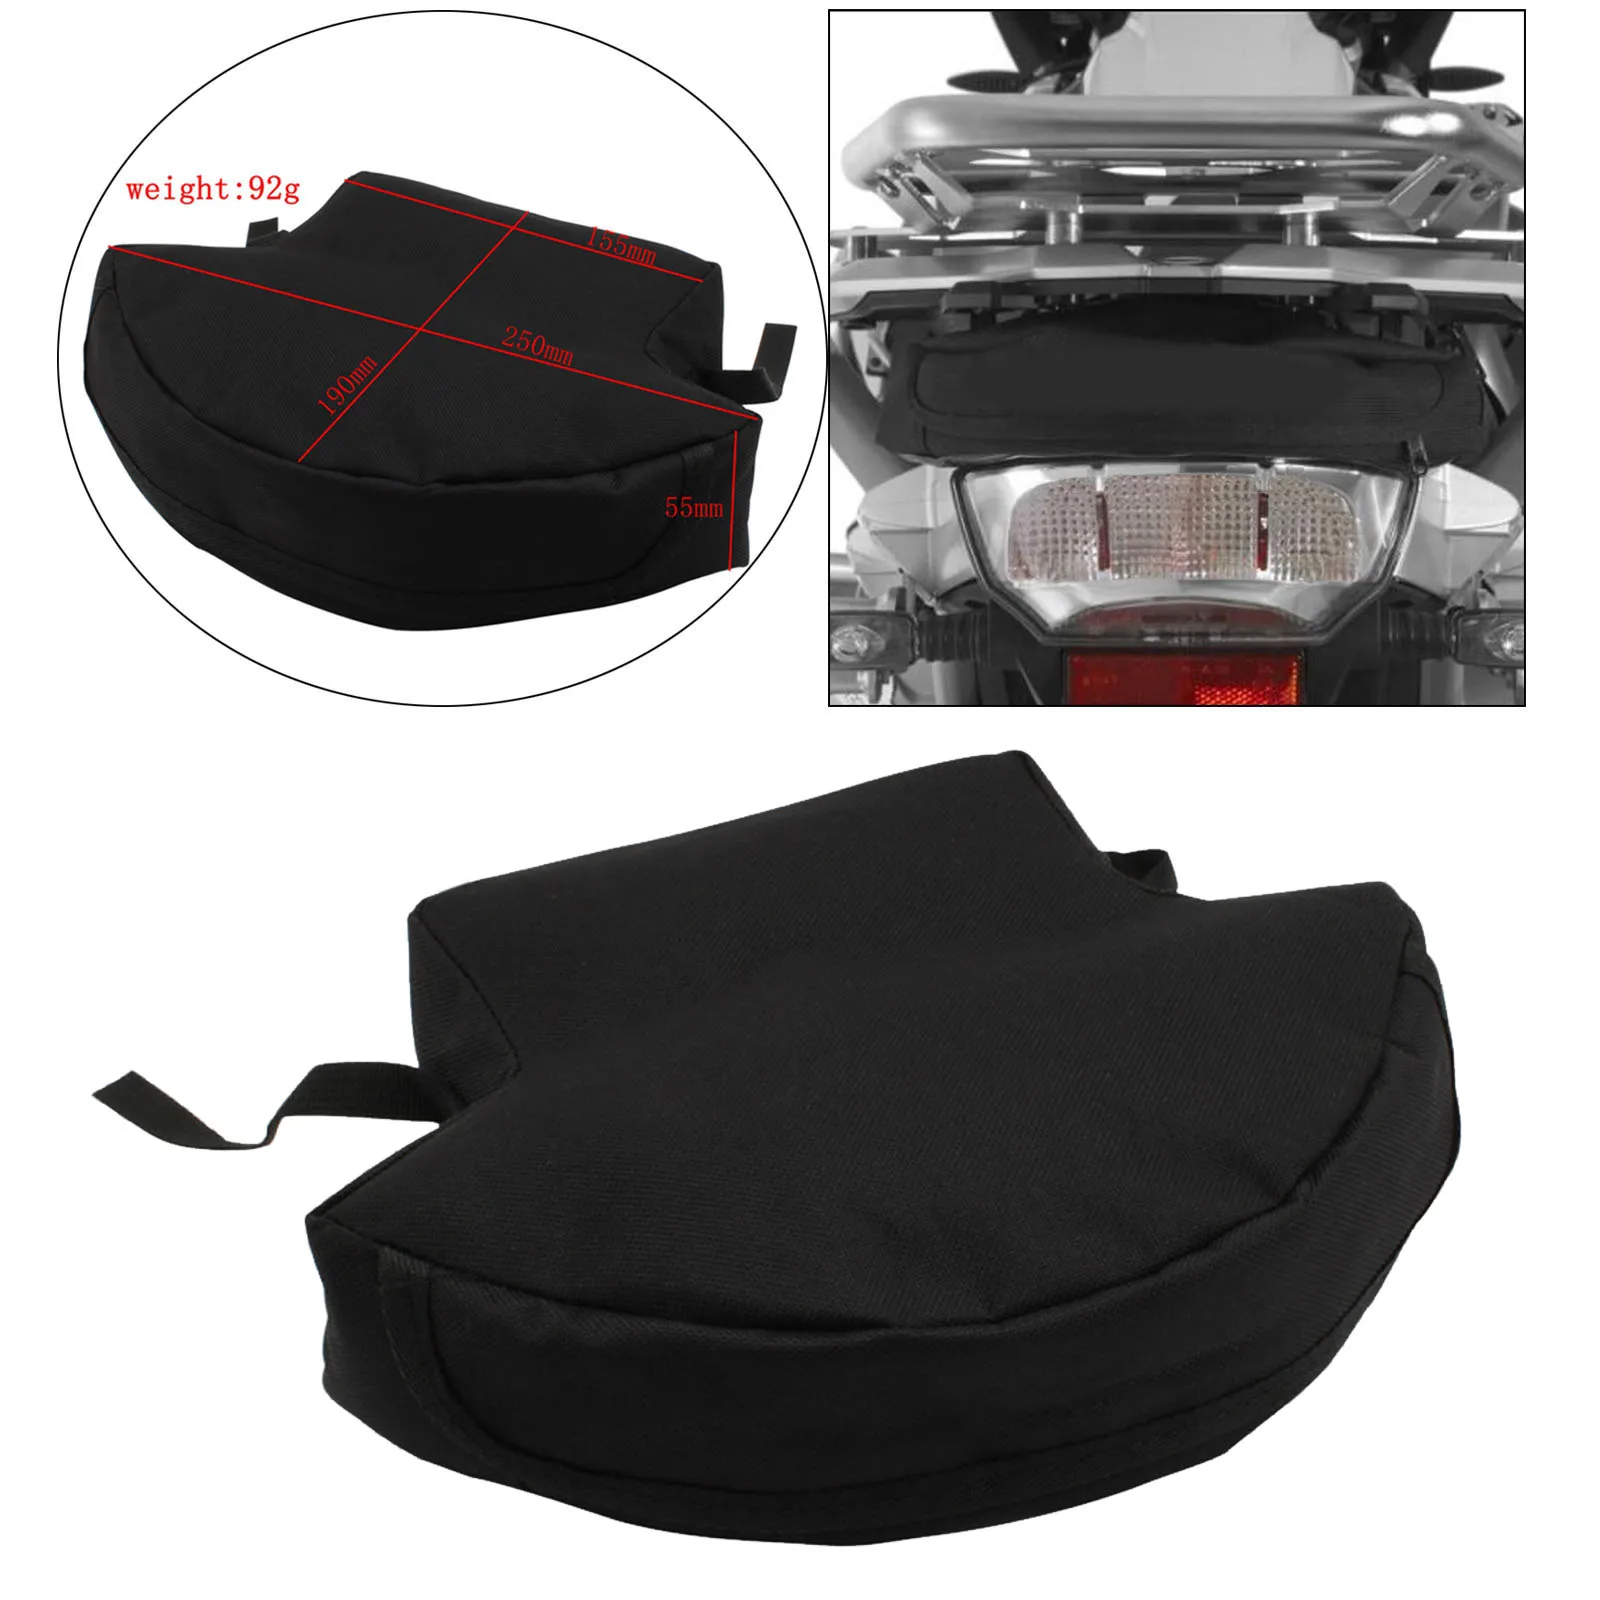 Motorcycle Gap Tool Storage Bag Seat Tail Bag for BMW R1250GS R1200GS F850GS F750GS 2013-